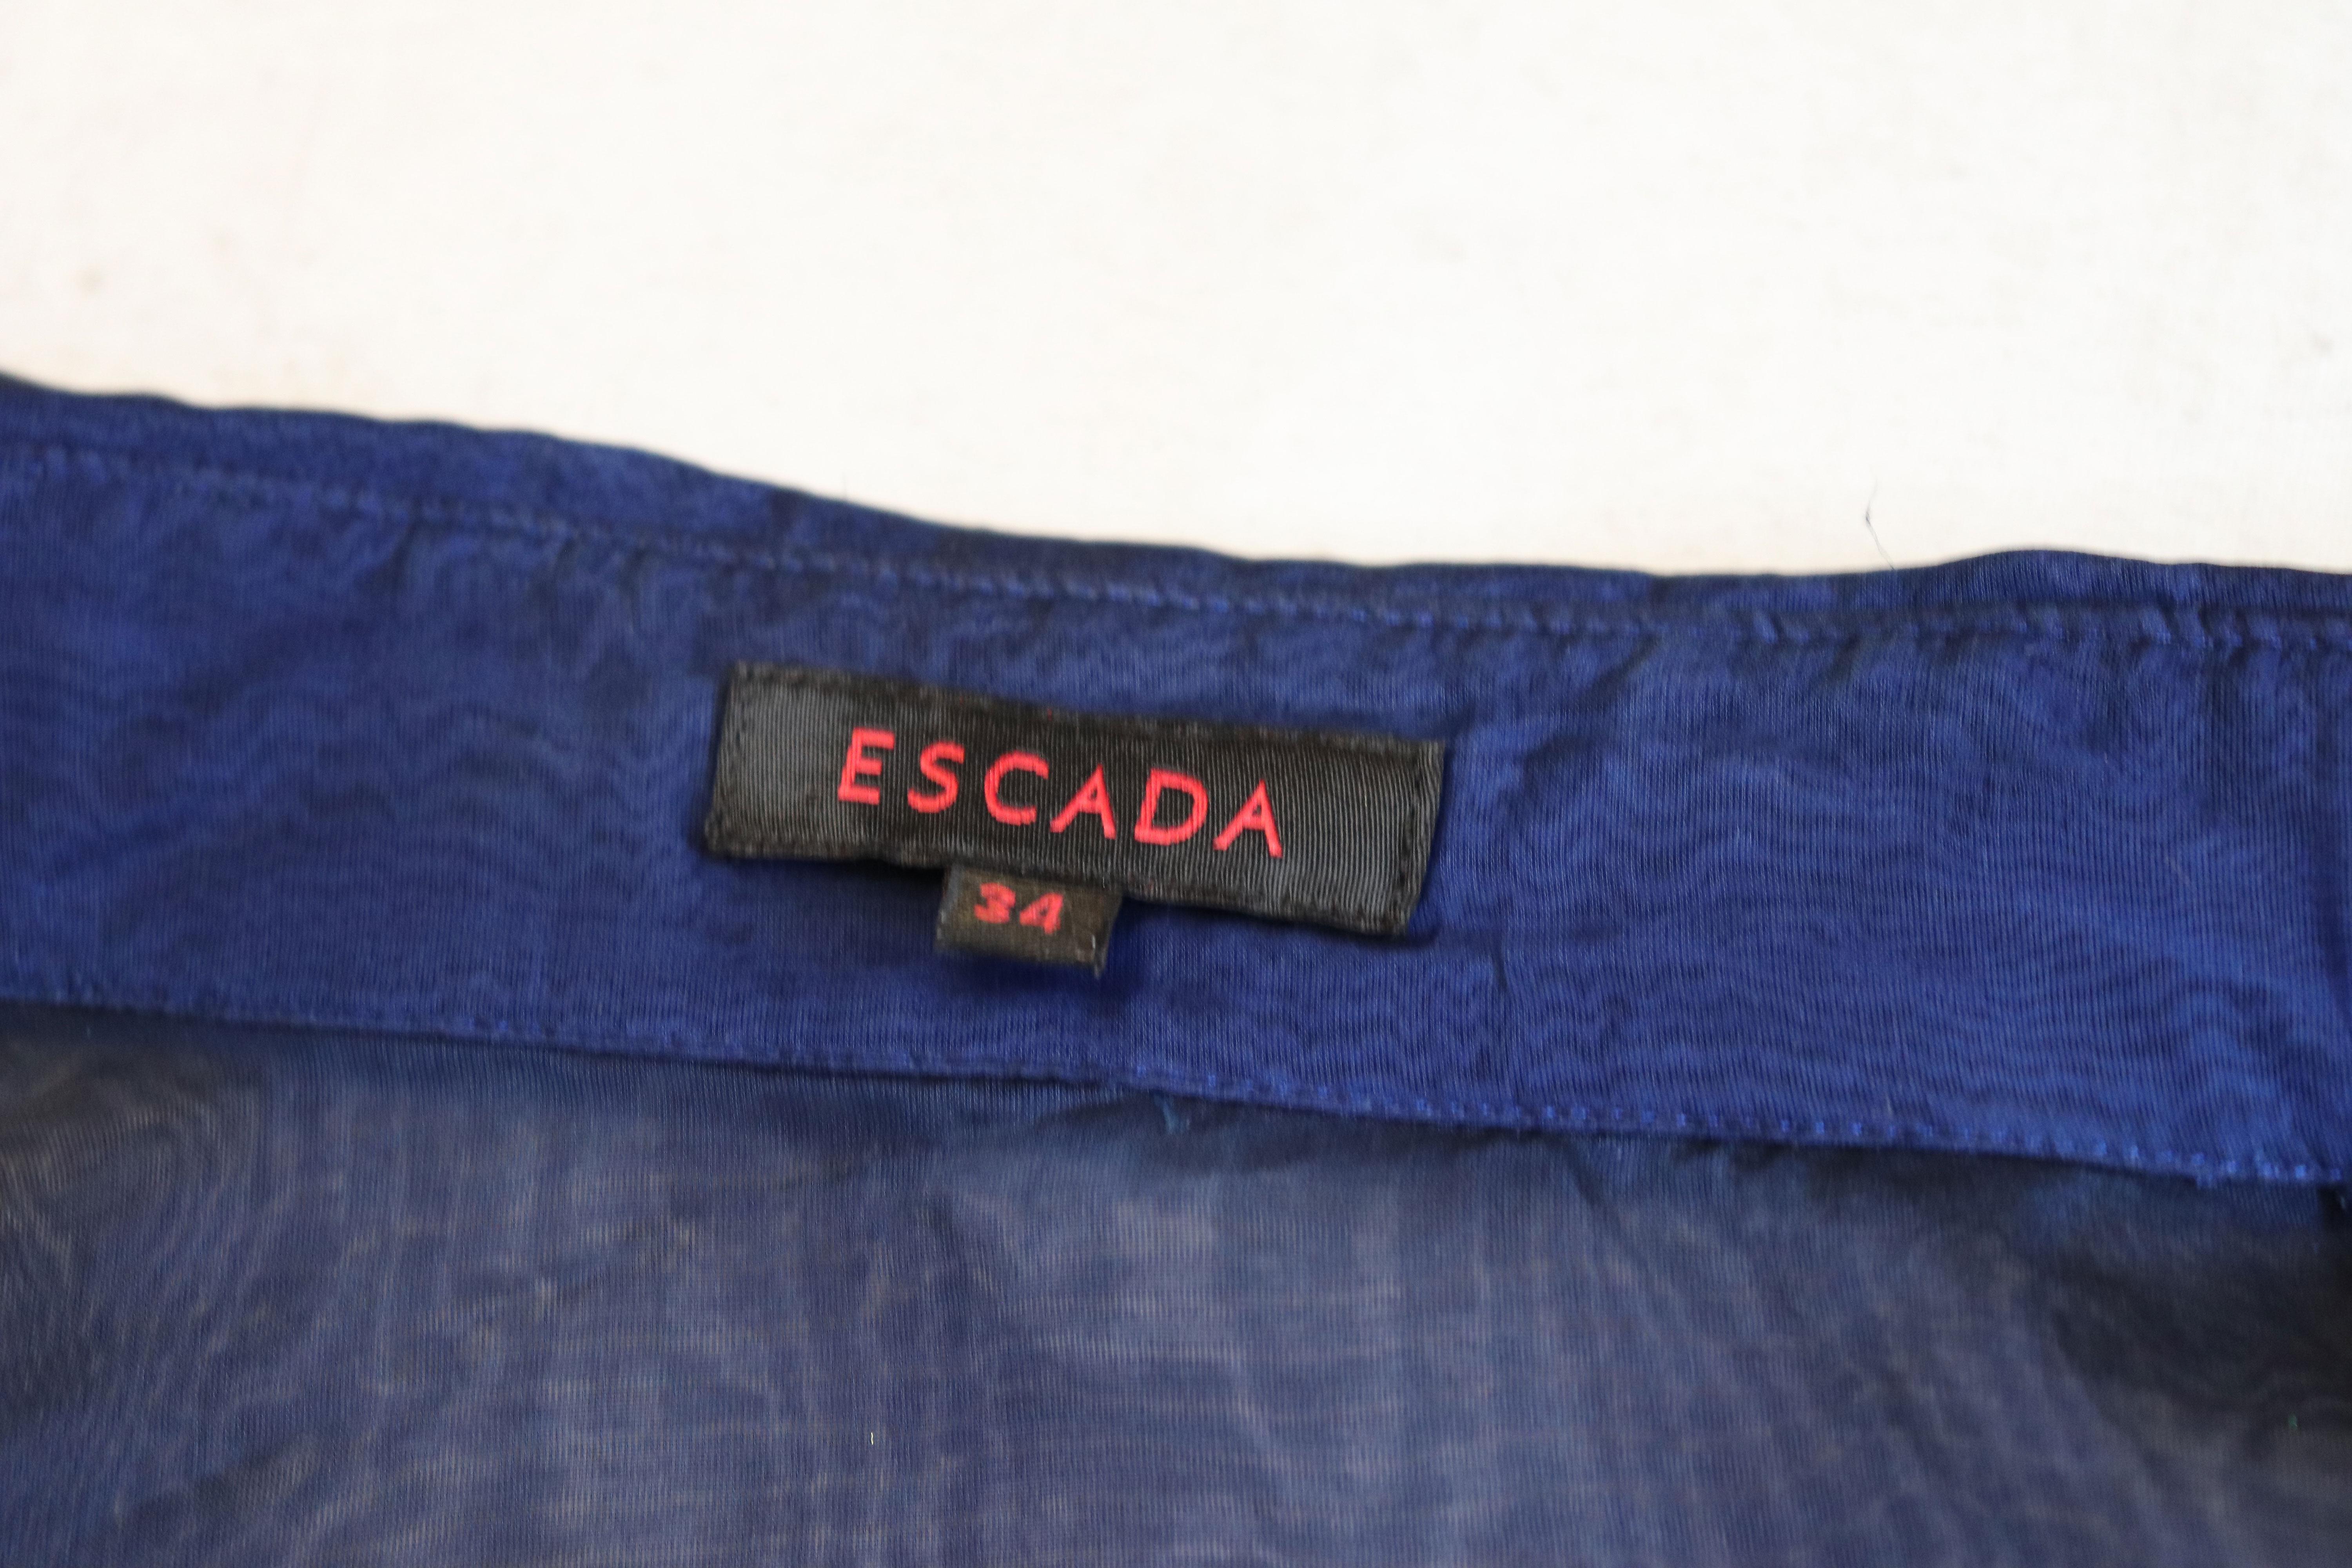 A chic silk shirt by Escada. The shirt has pleats at the front, and singe button cuffs.